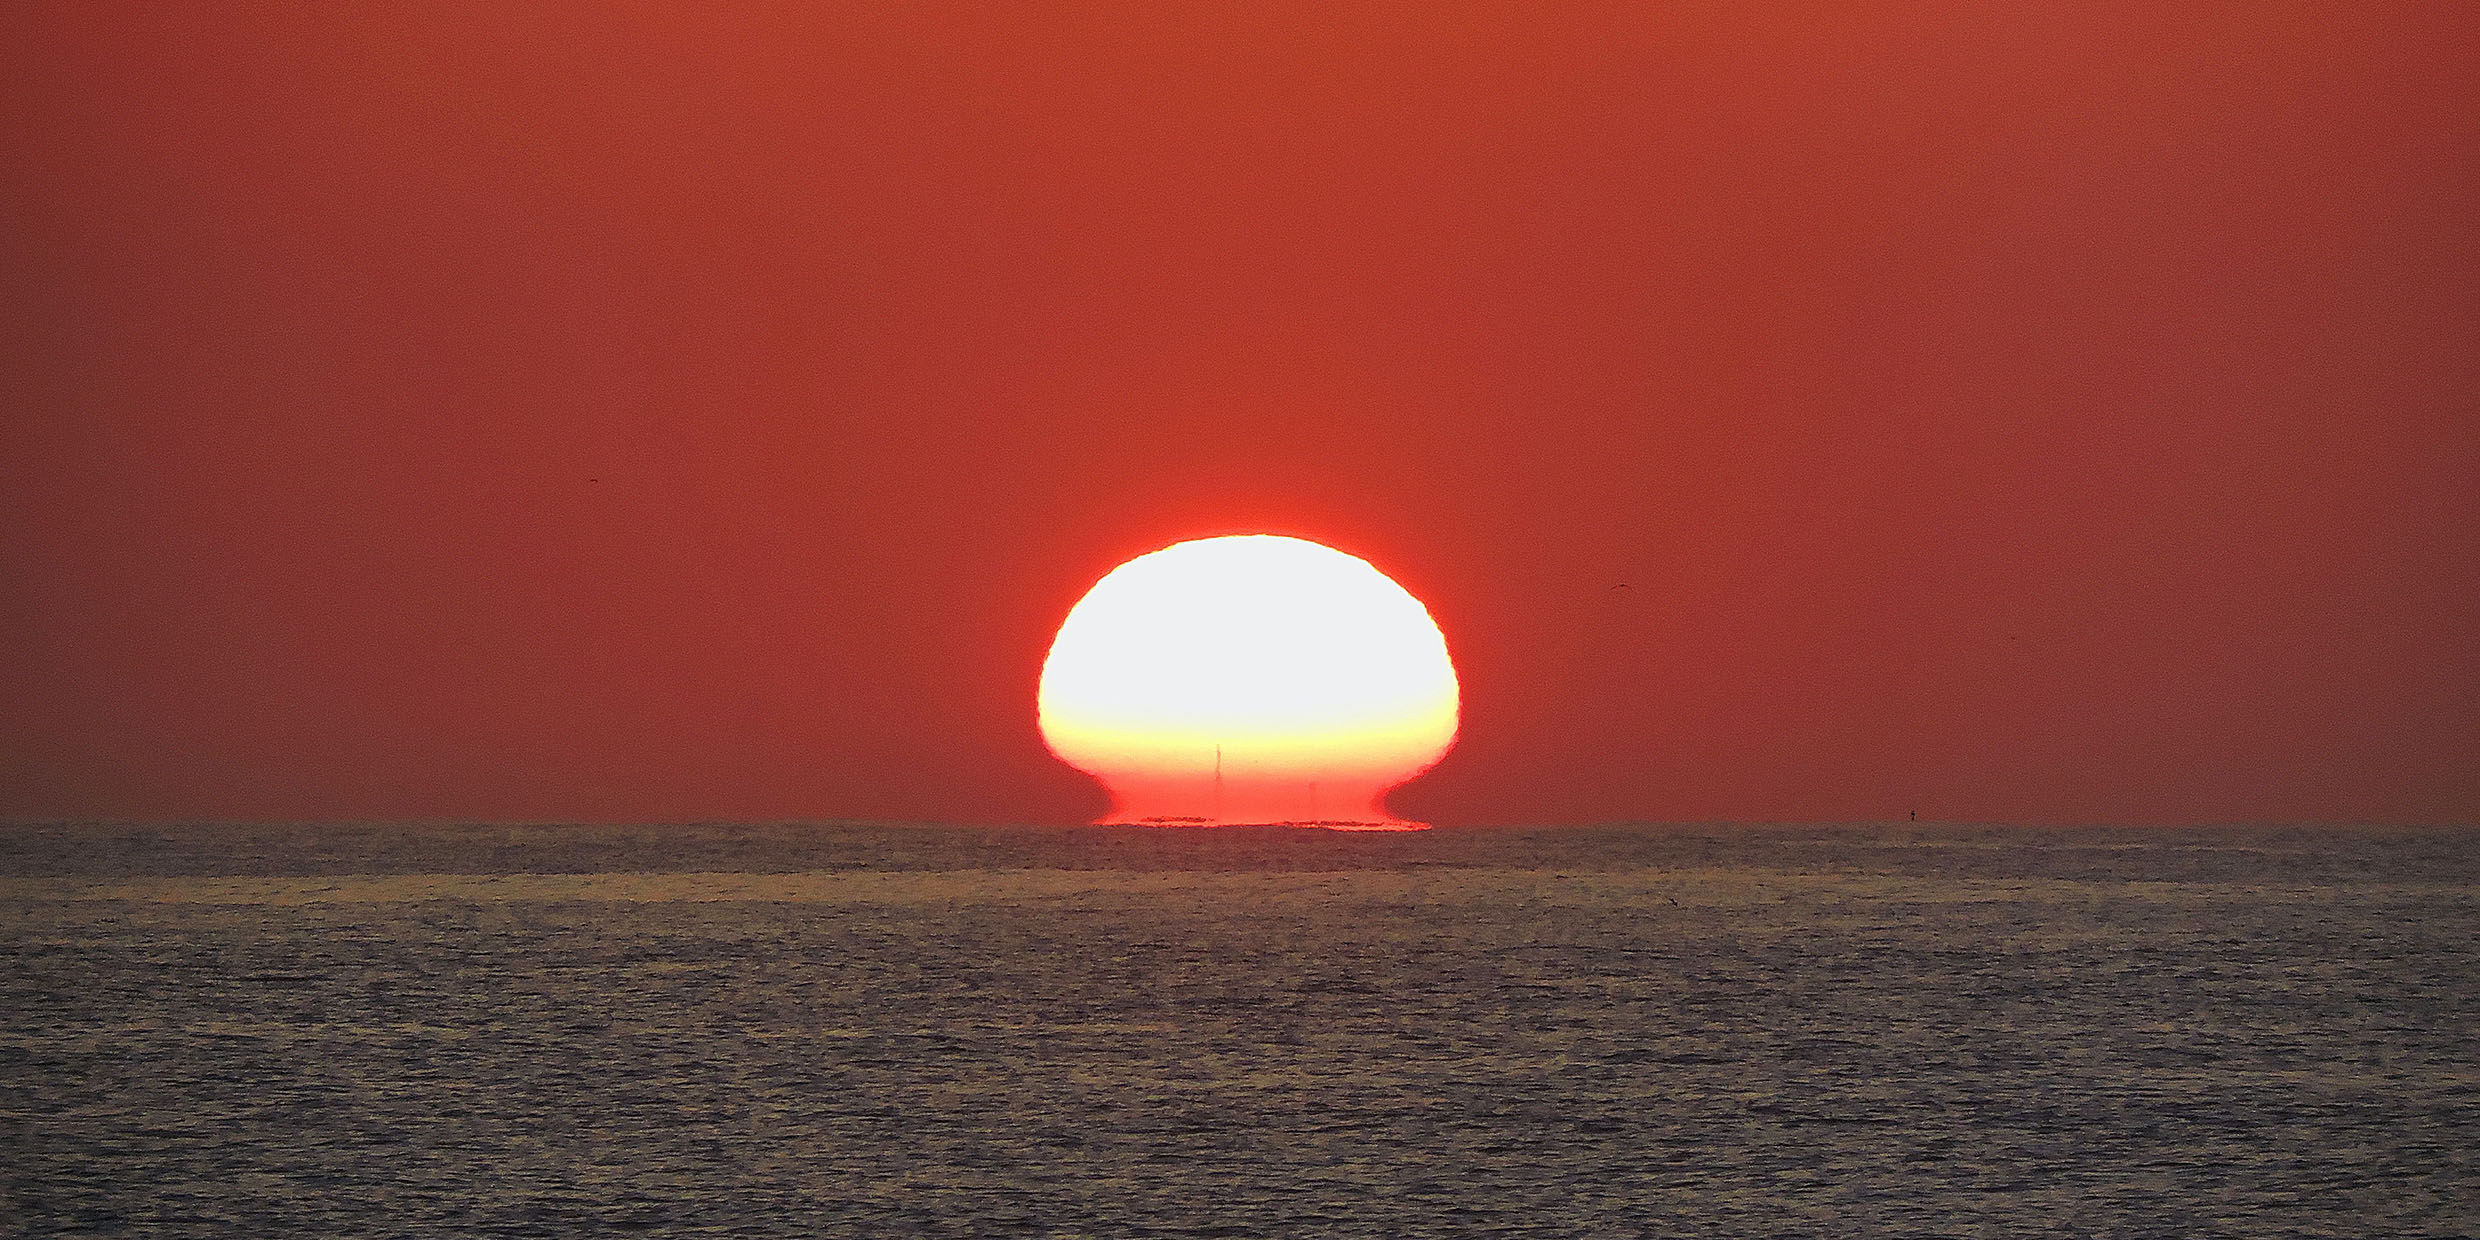 Image of a sunset over the ocean